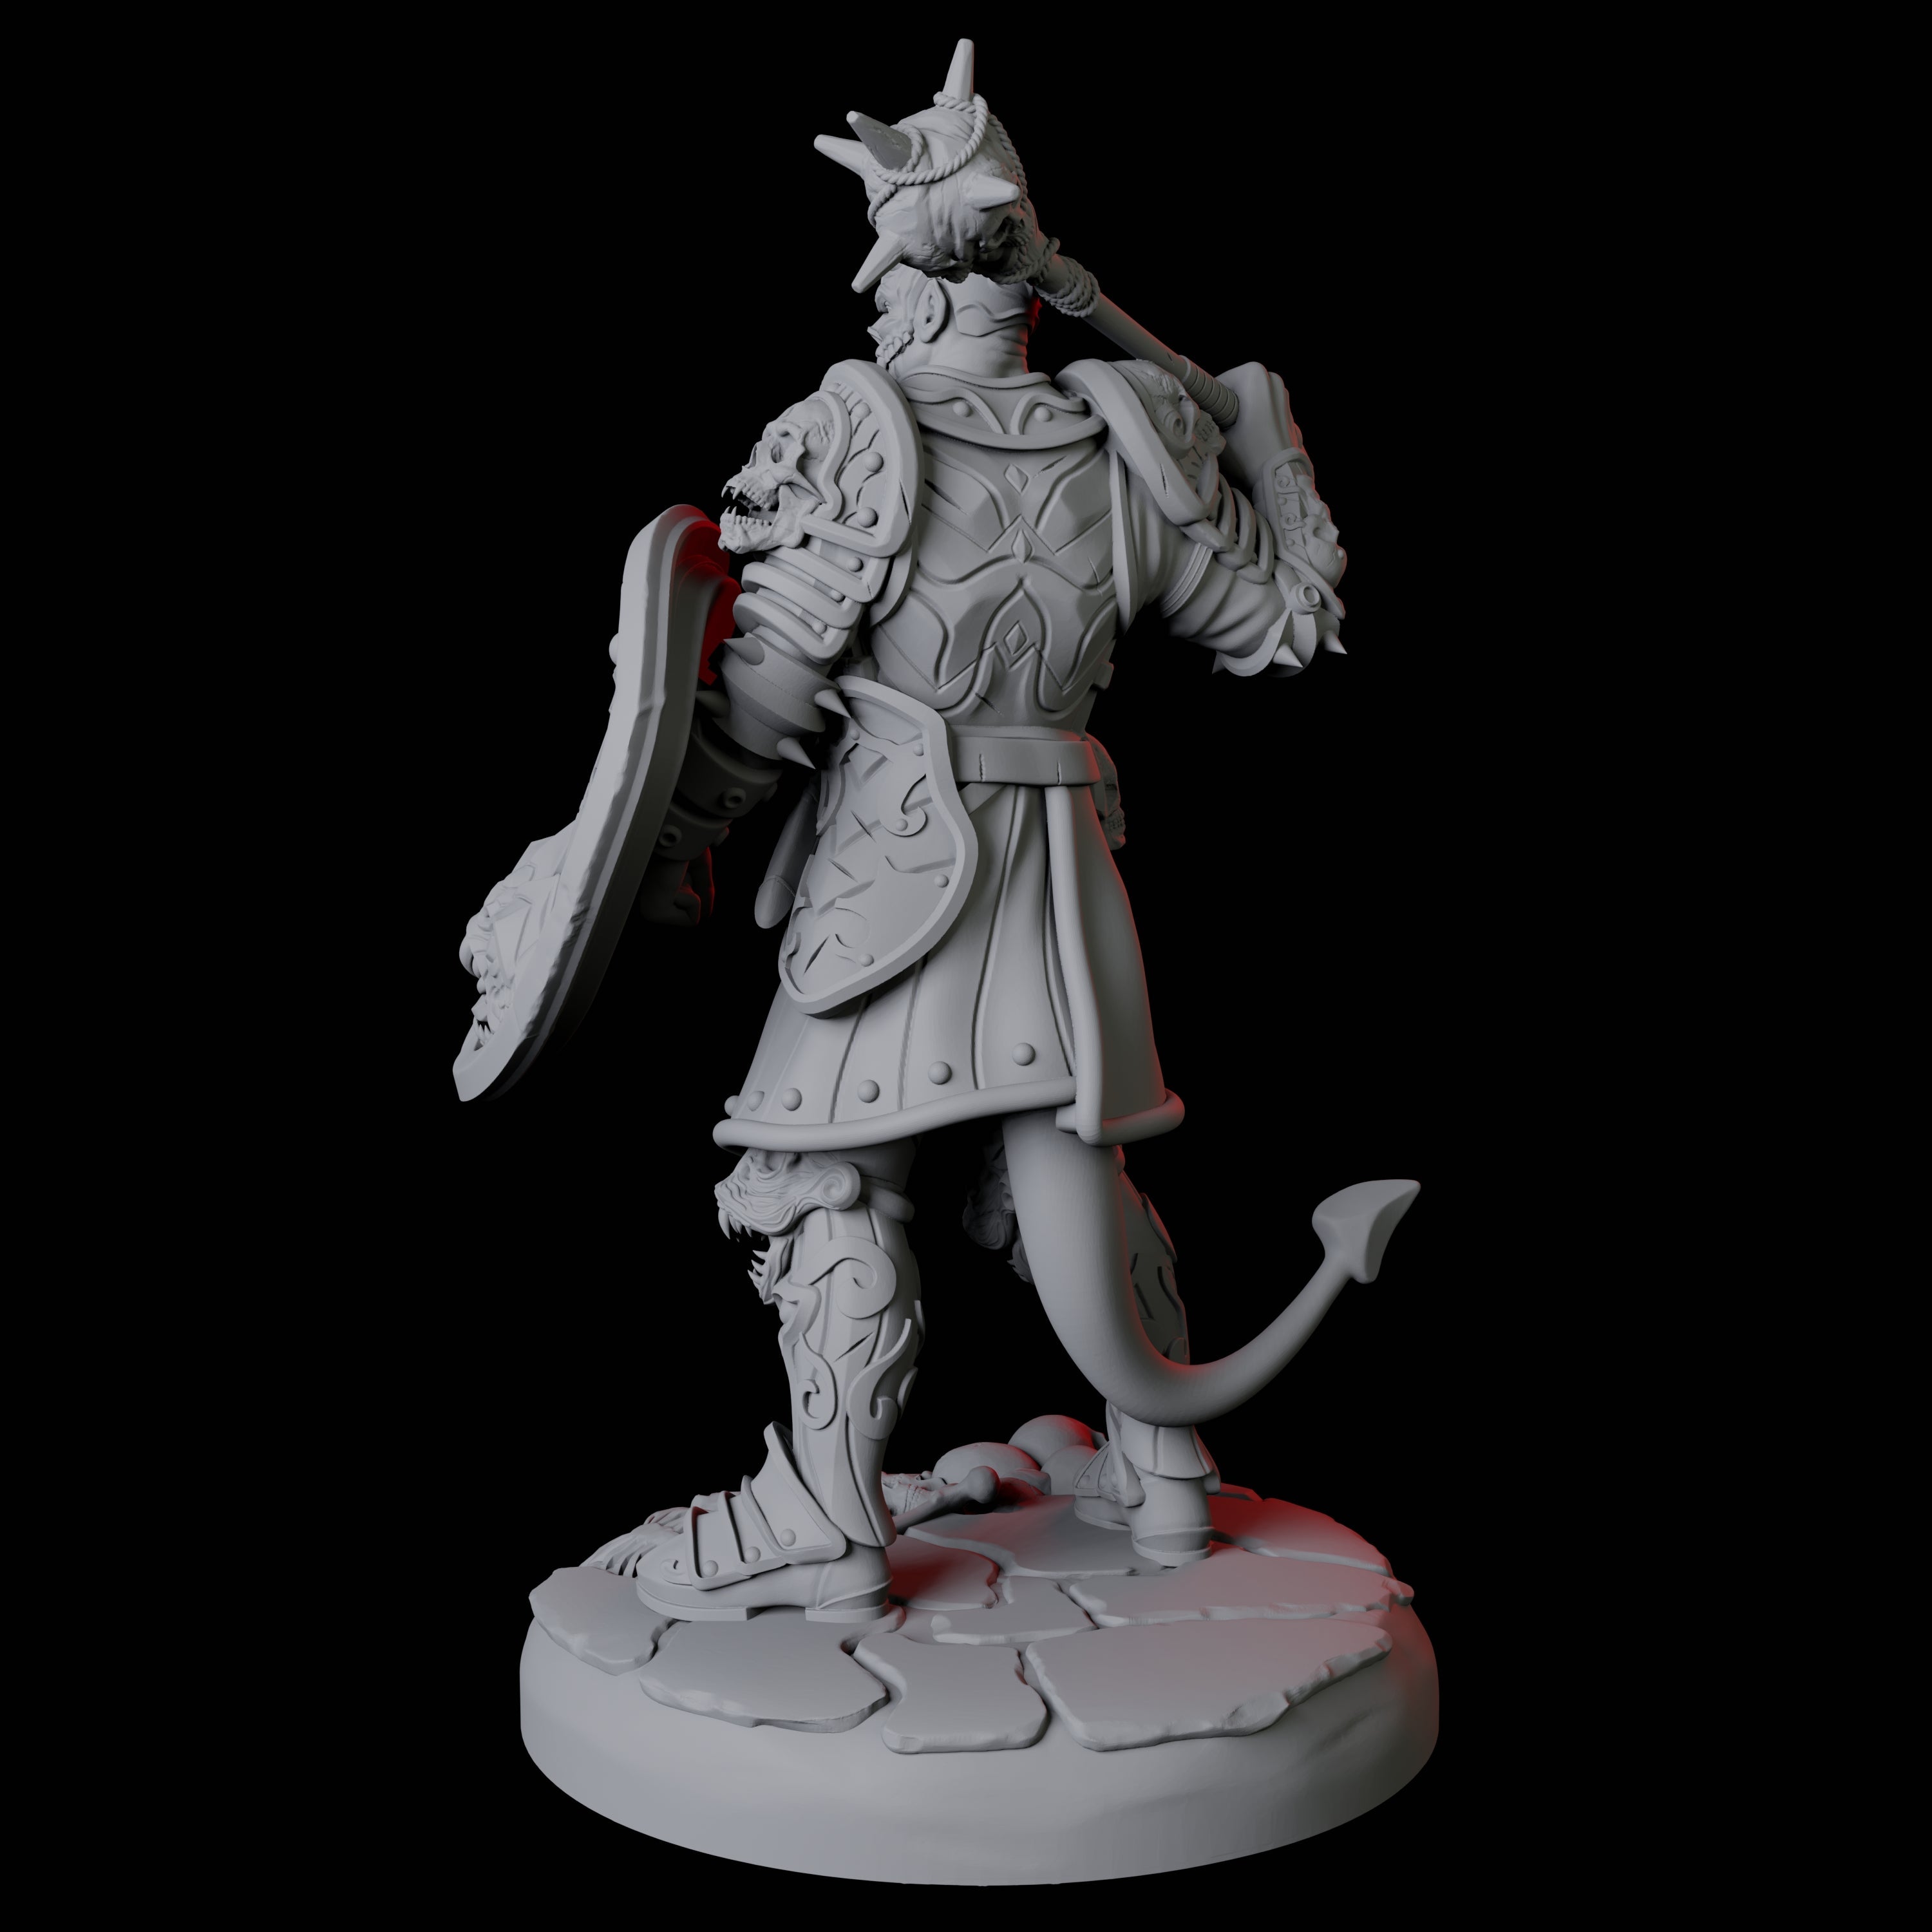 Threatening Bearded Devil C Miniature for Dungeons and Dragons, Pathfinder or other TTRPGs